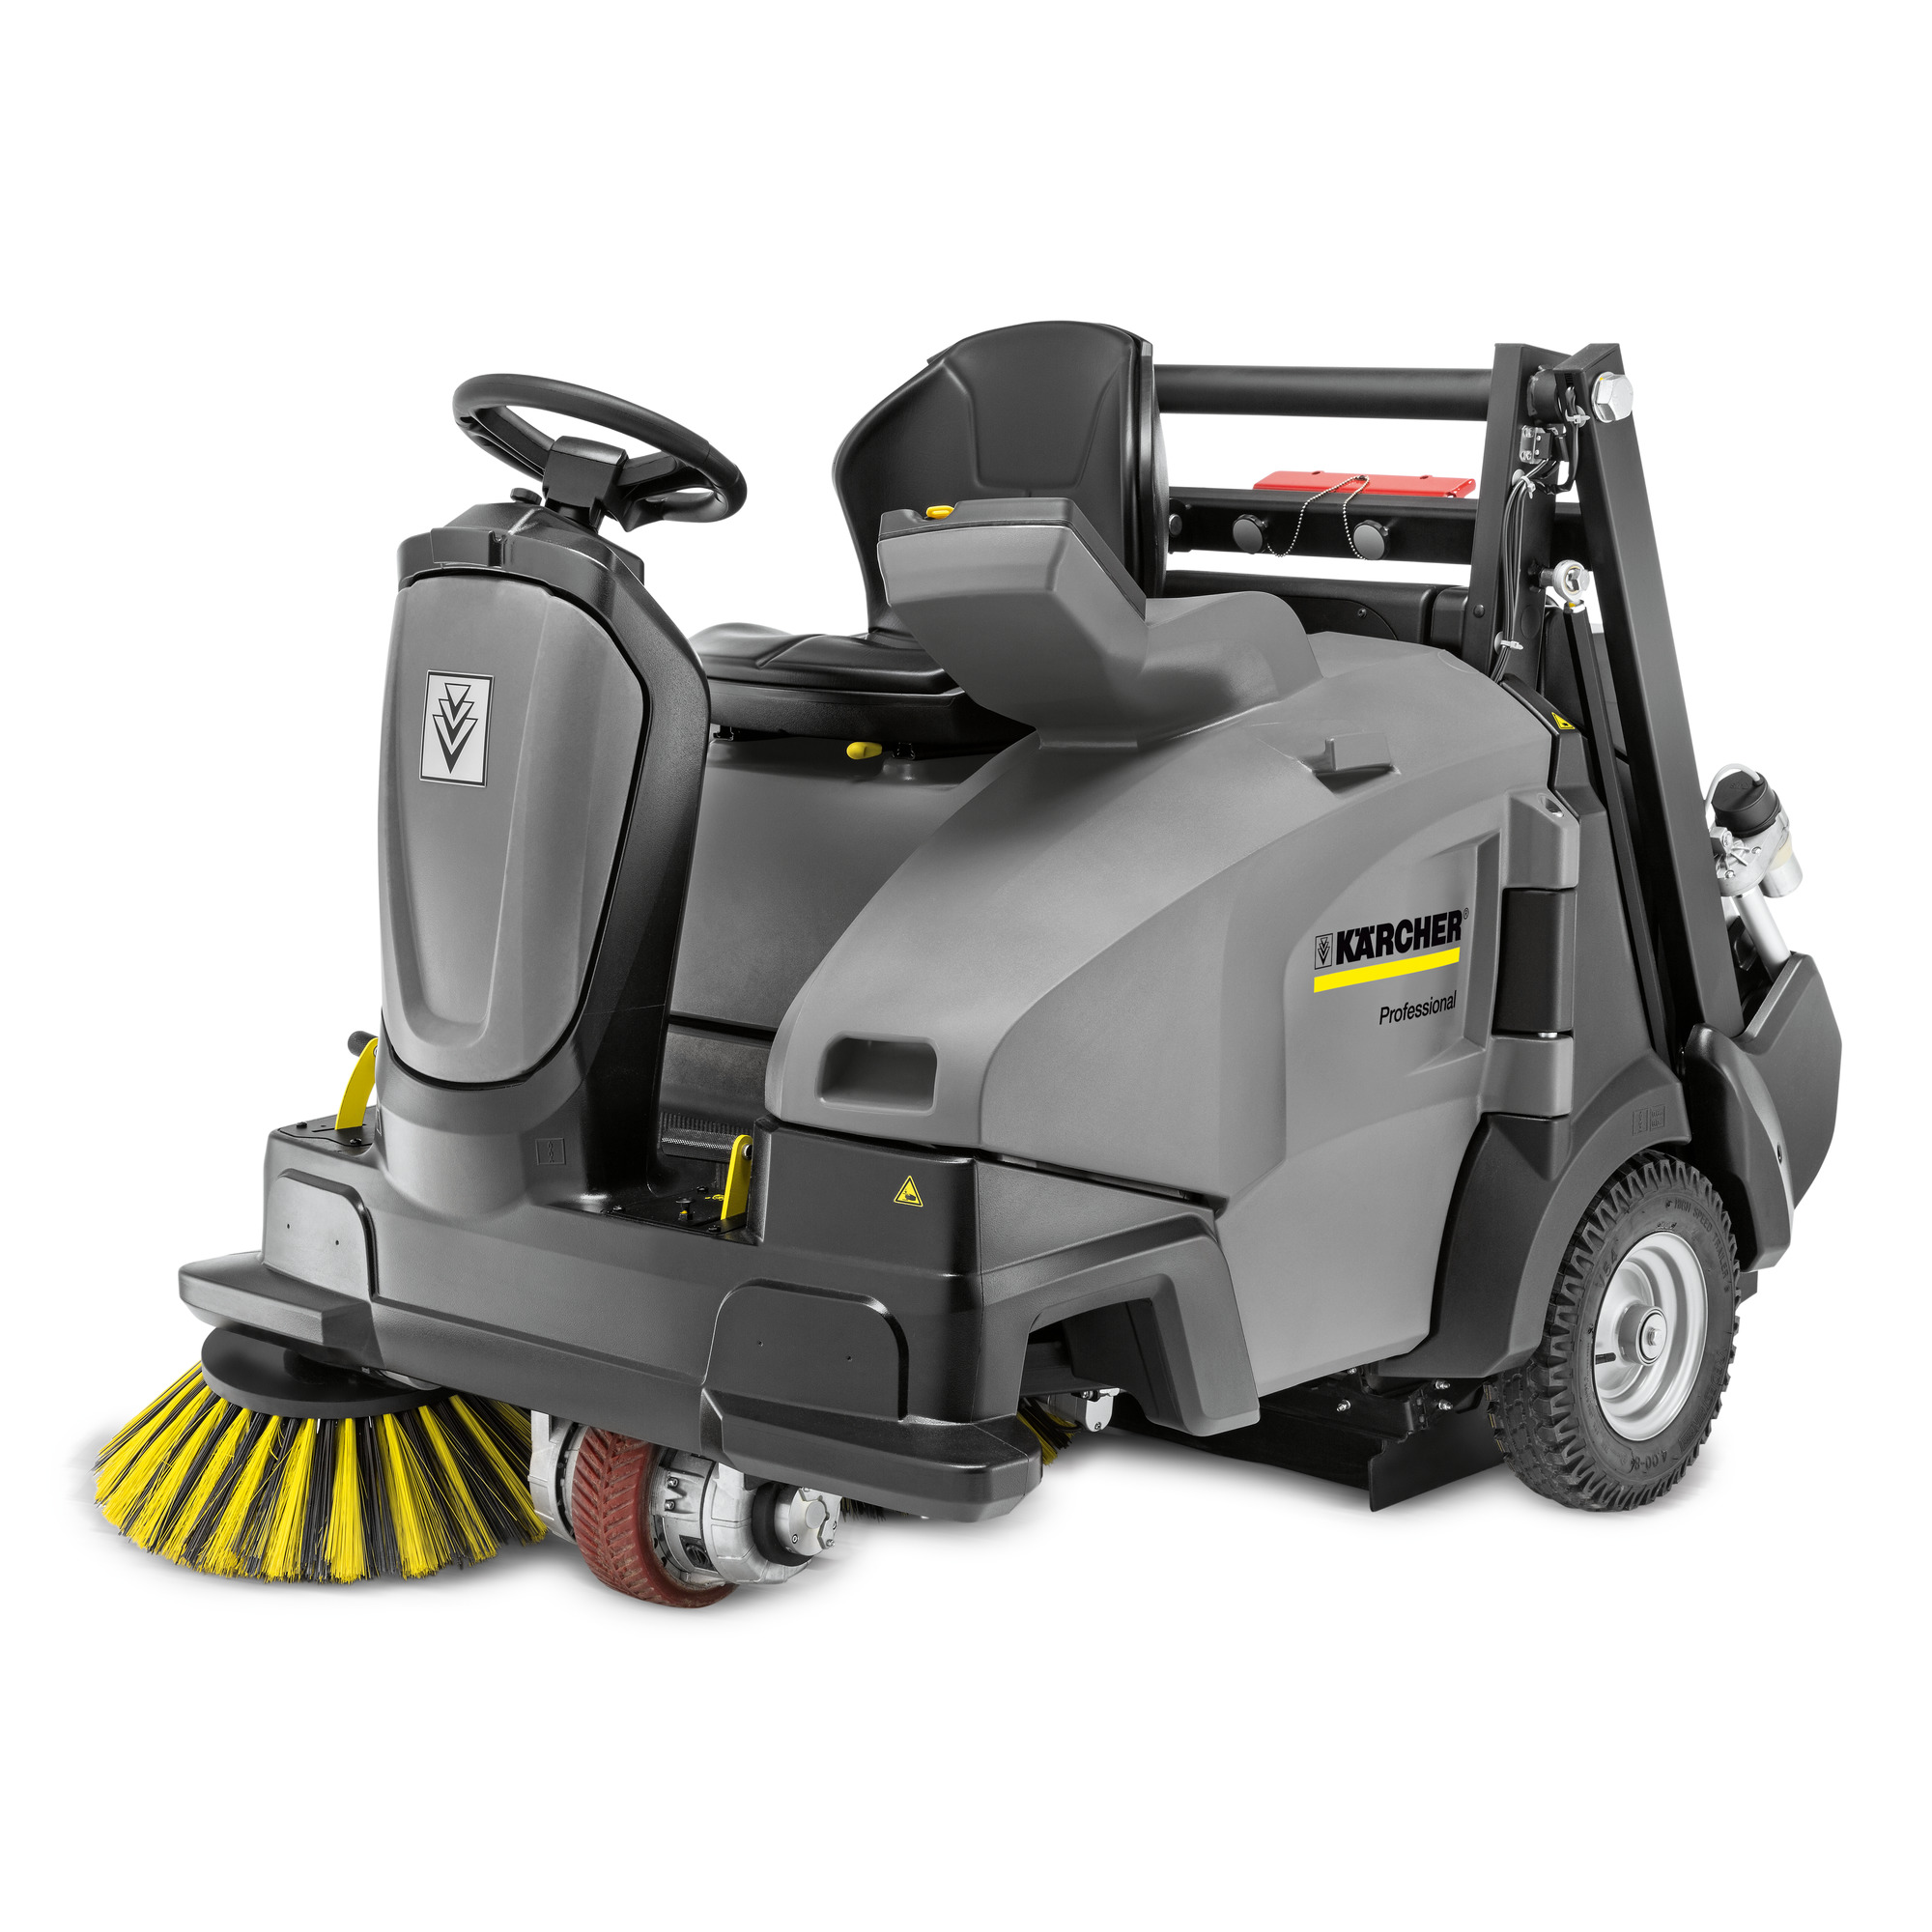 KM 105/110 R BP 3SB NO
BATTERIES OR CHARGER. RIDE ON
SWEEPER